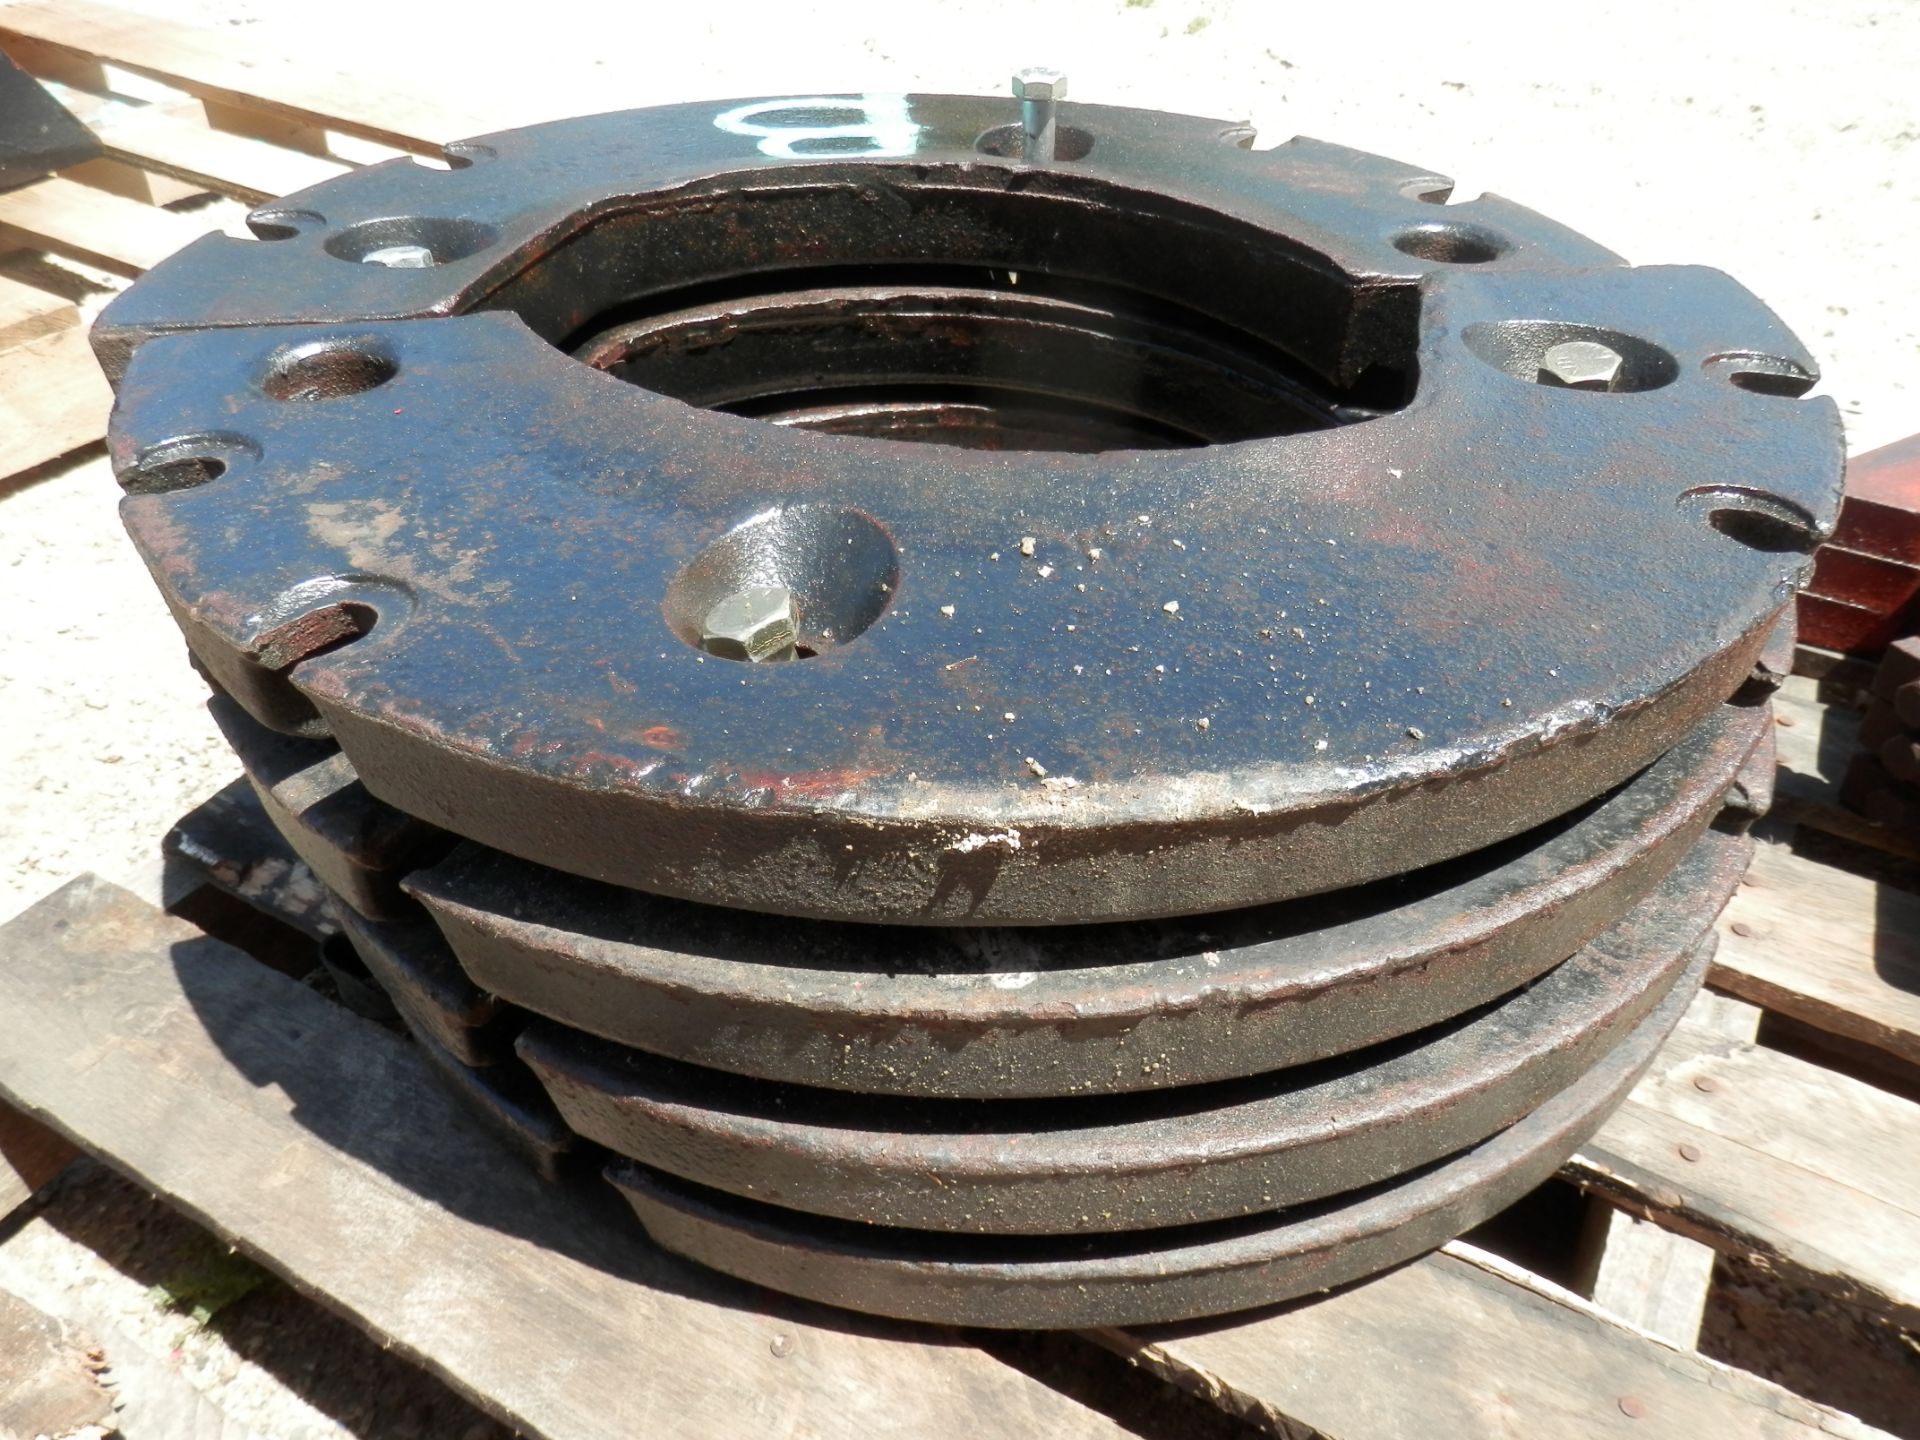 WEIGHTS B-(4) Sets BLACK SPLIT REAR WHEEL WEIGHTS, Sold as one unit. - Image 3 of 3